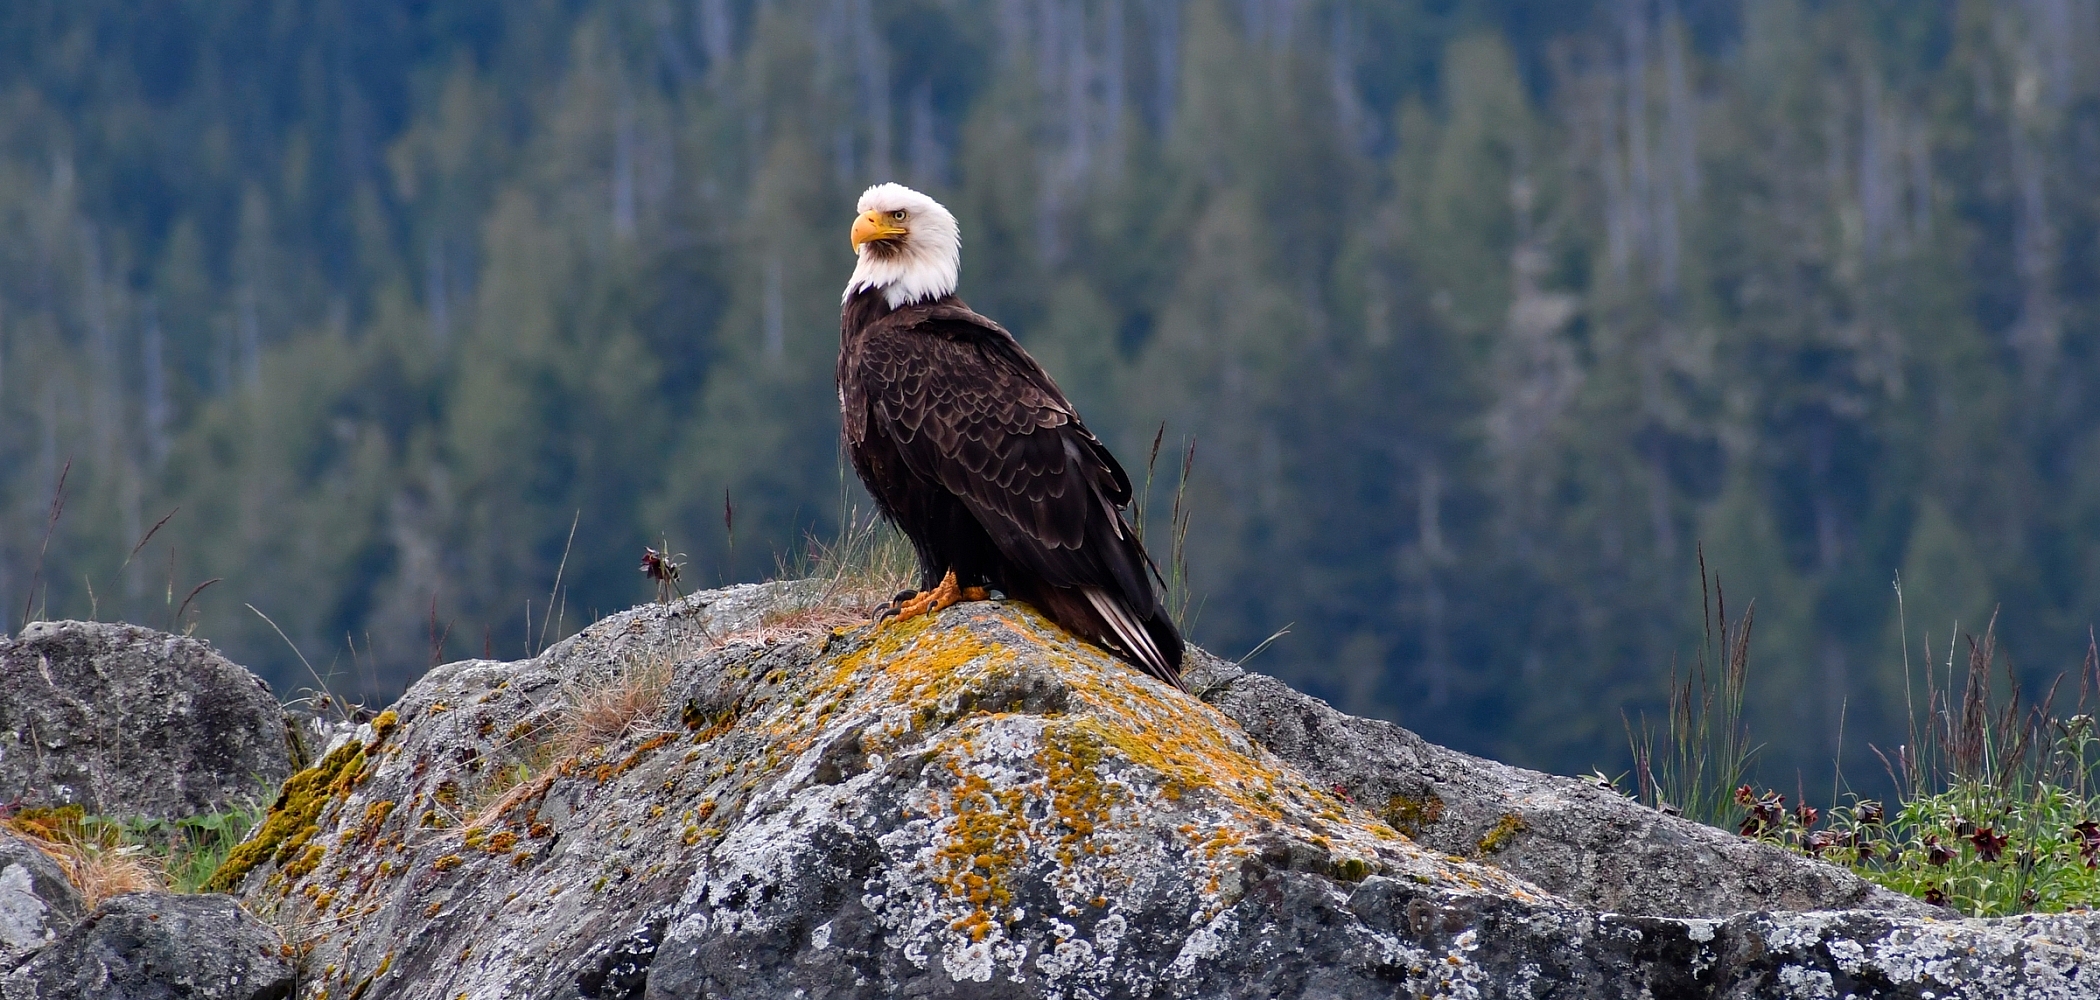 A bald eagle sits on a coastal boulder with thick trees in the background.